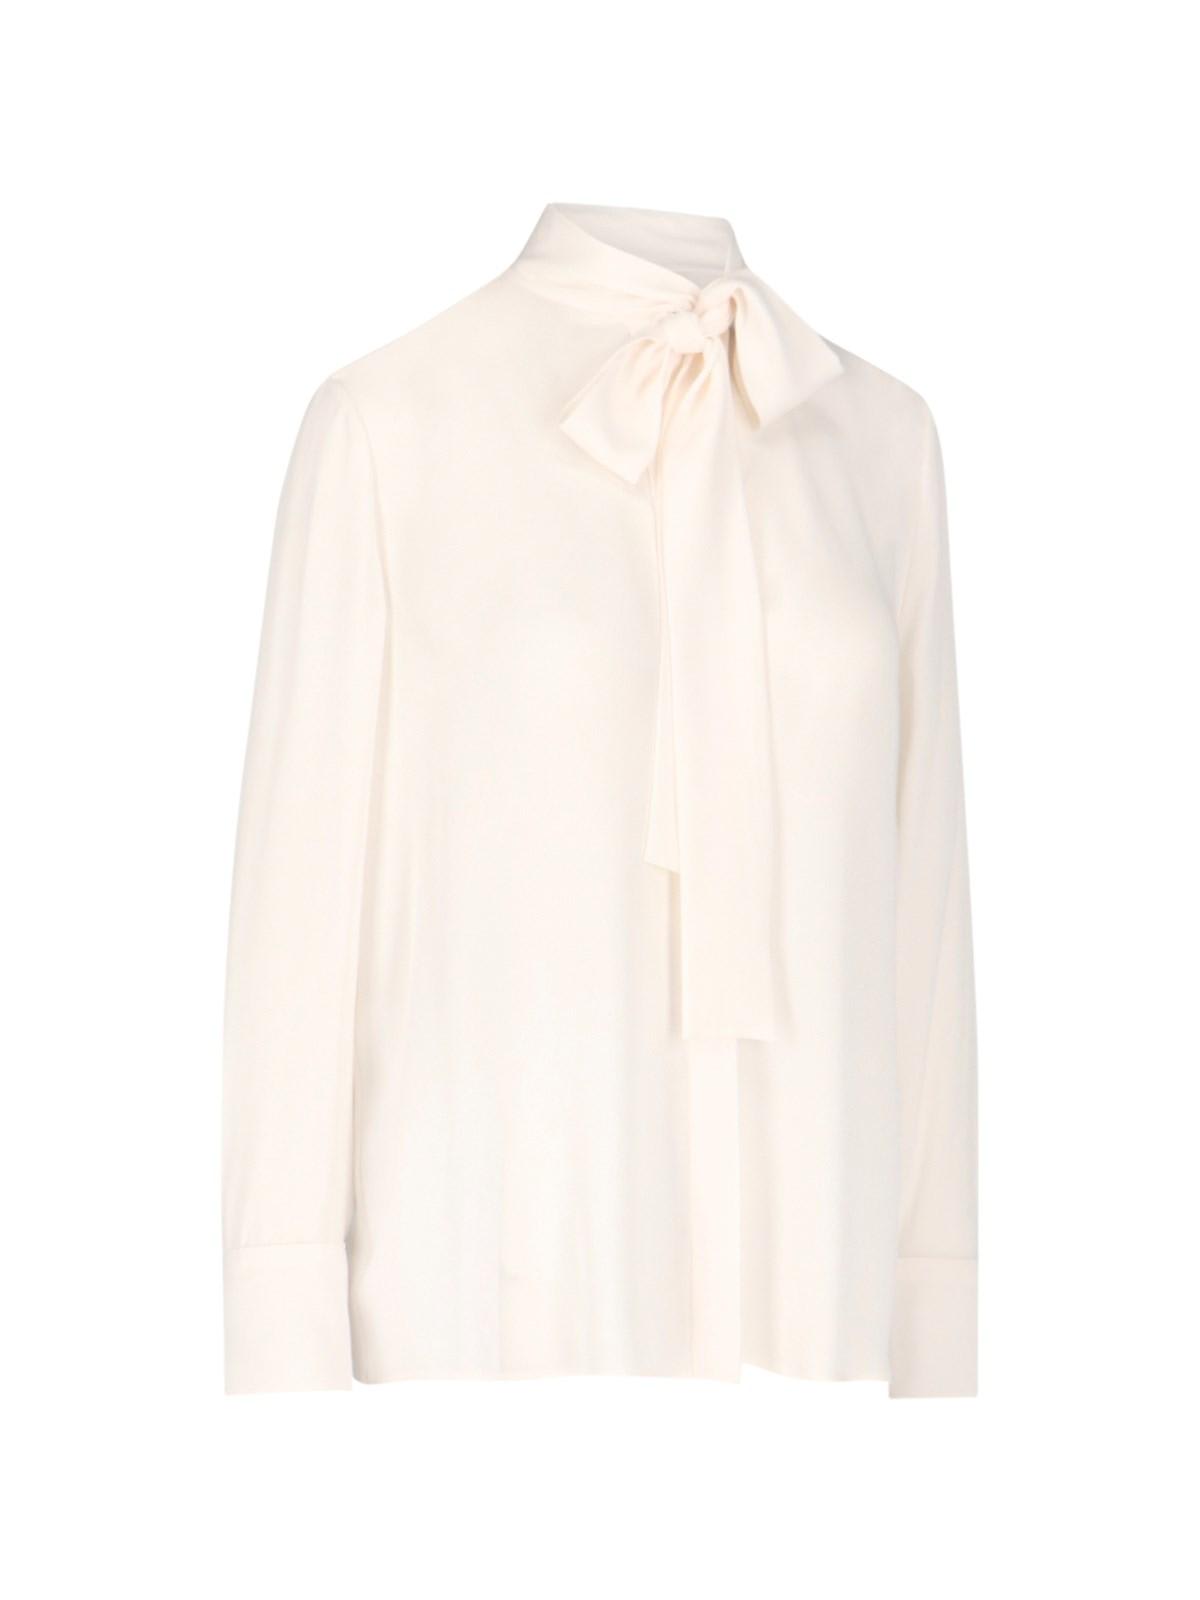 VALENTINO PUSSY BOW DETAIL BLOUSE